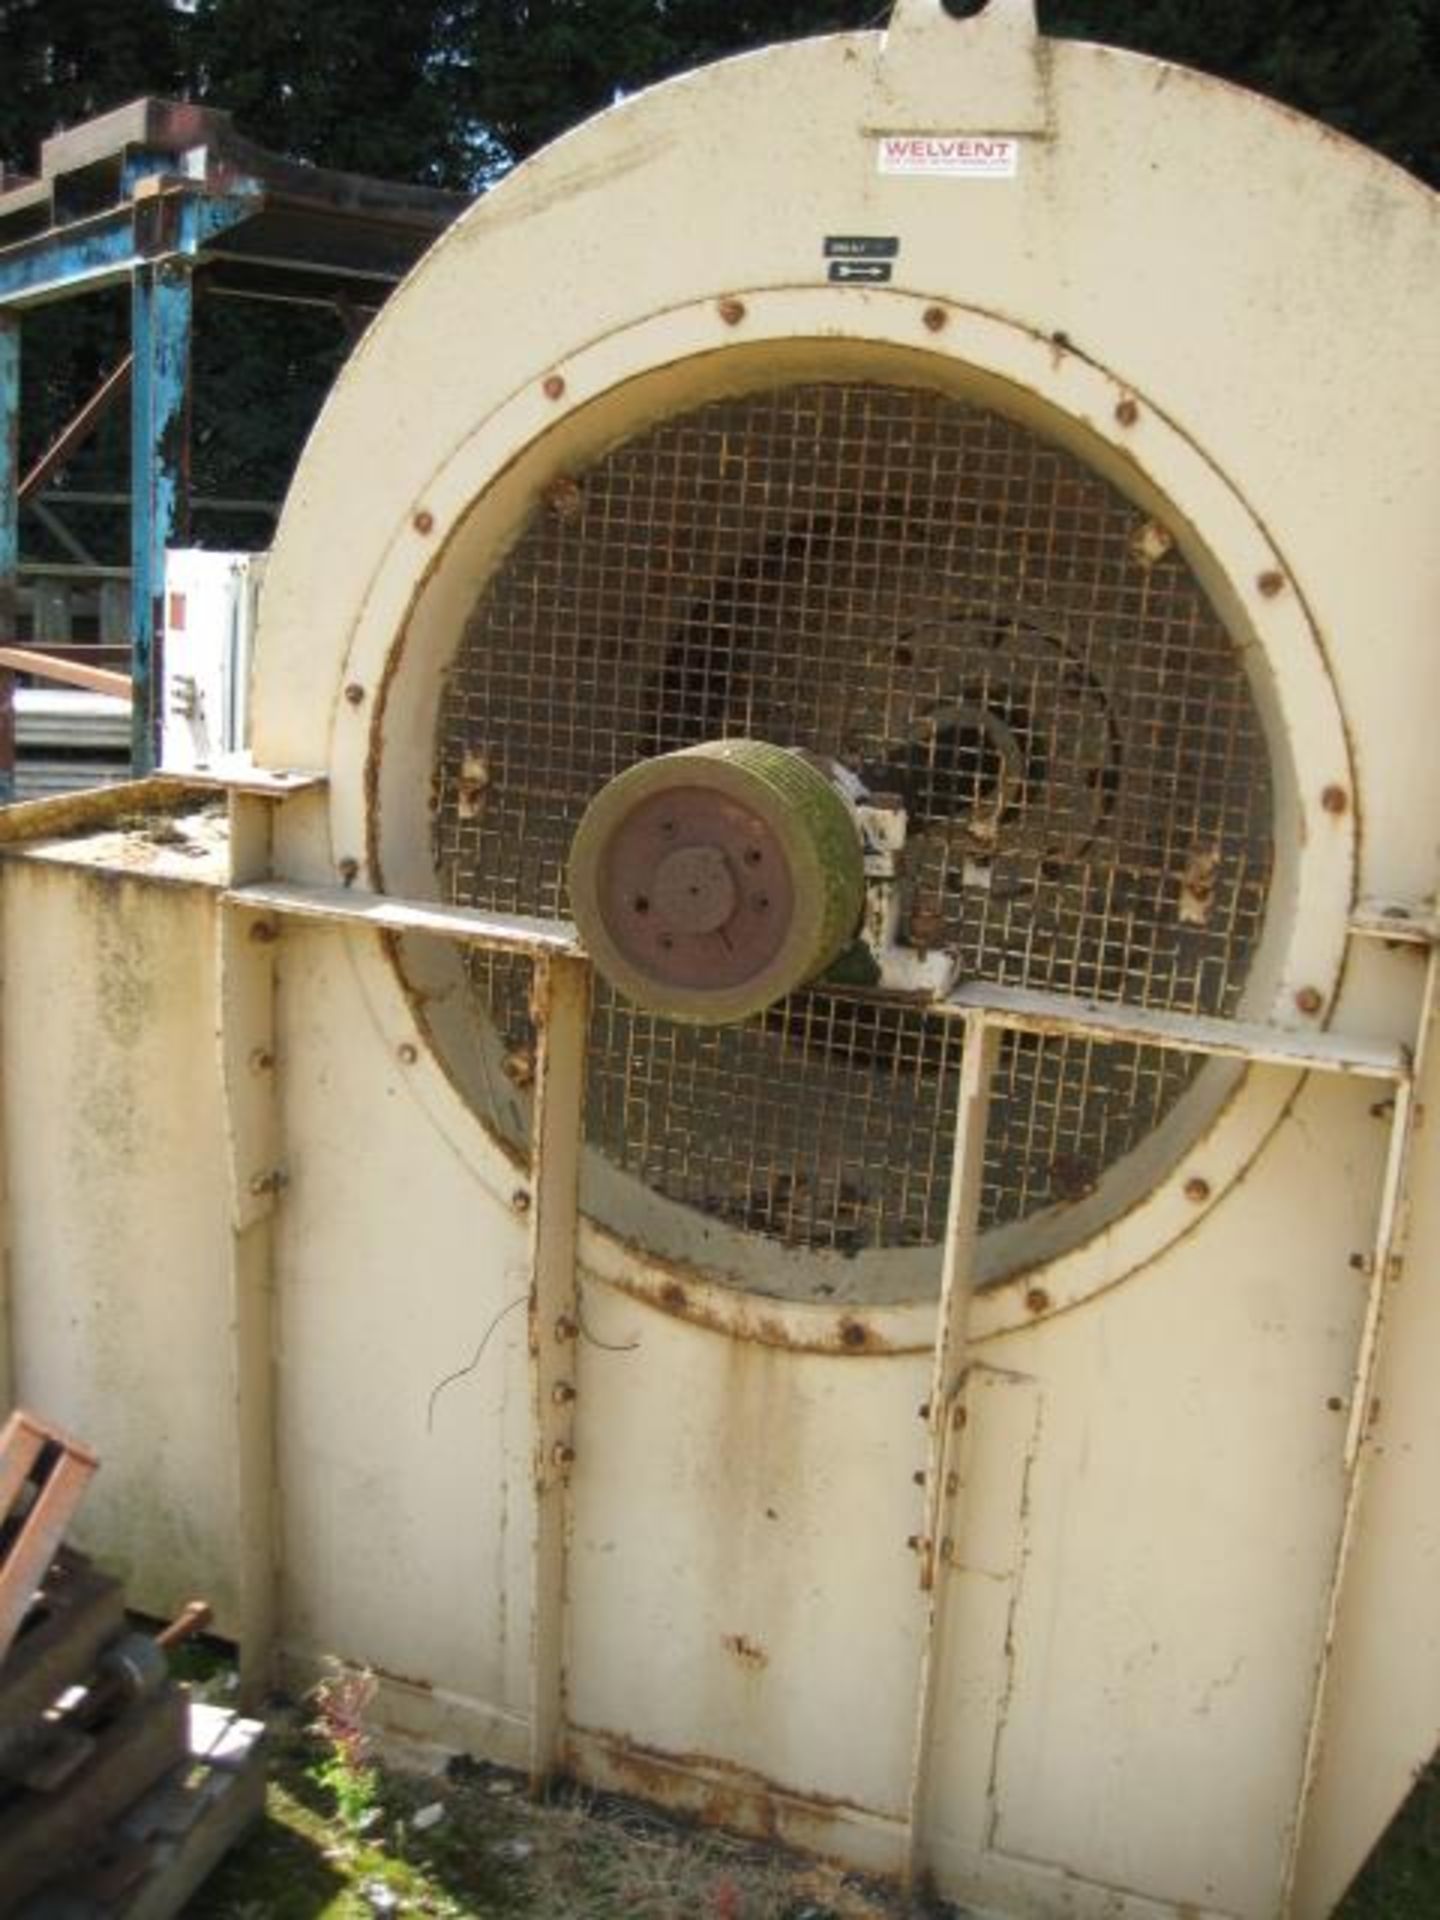 Welvent Centrifugal Fan, with backward lamina blades and air inlets on both sides, belt driven but - Image 2 of 4